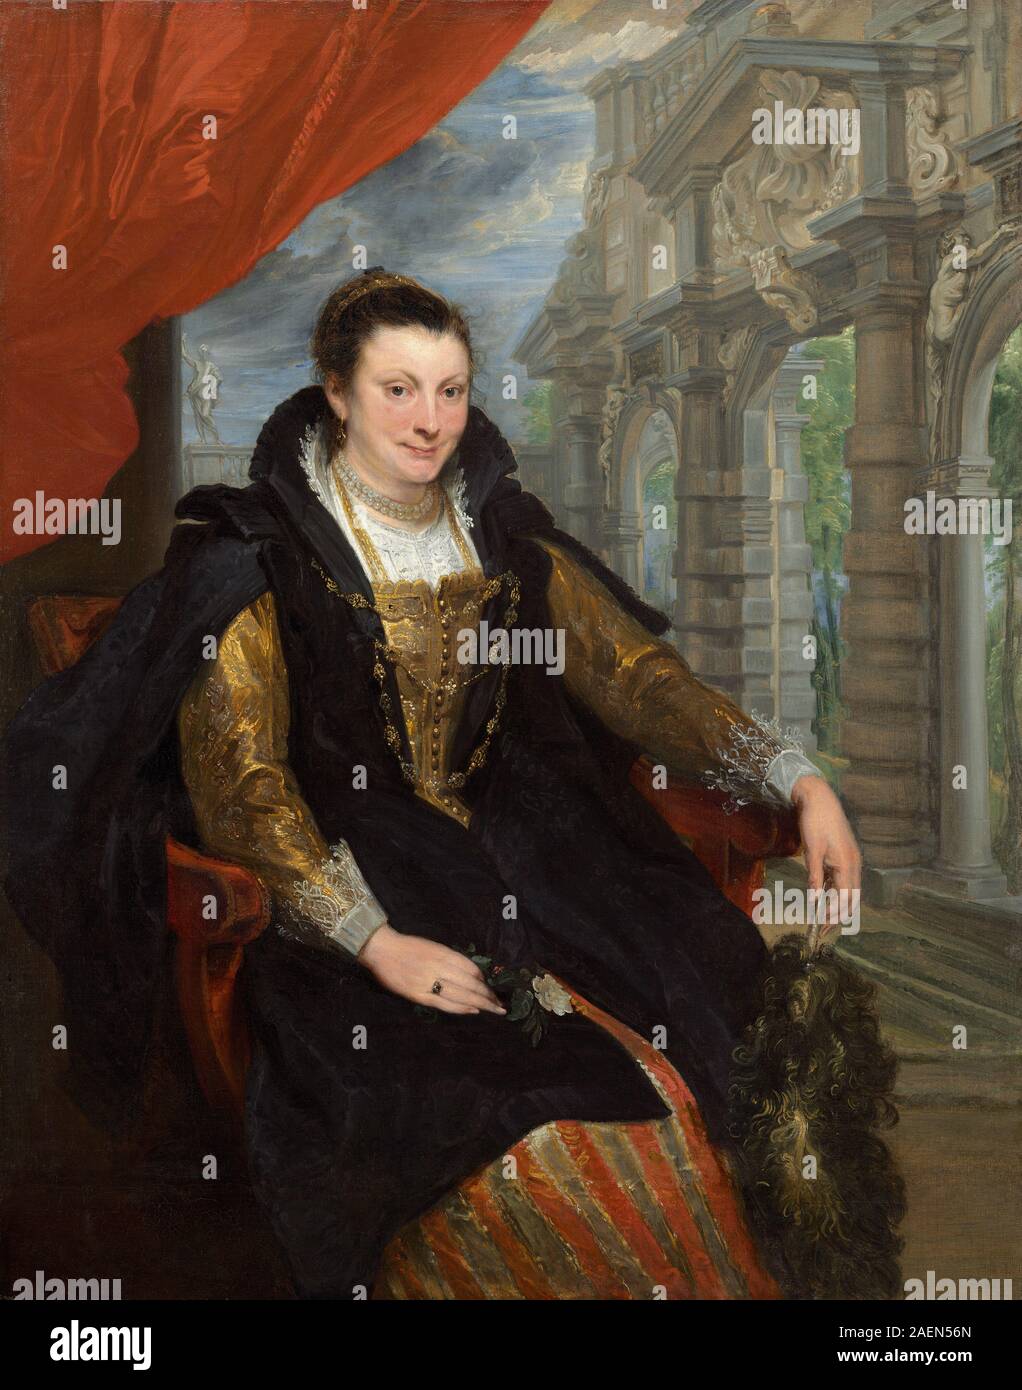 Sir Anthony van Dyck, Isabella Brant, 1621, Sir Anthony van Dyck (Flemish, 1599 - 1641), Isabella Brant, 1621, oil on canvas, Andrew W. Mellon Collection 1937.1.47 Stock Photo